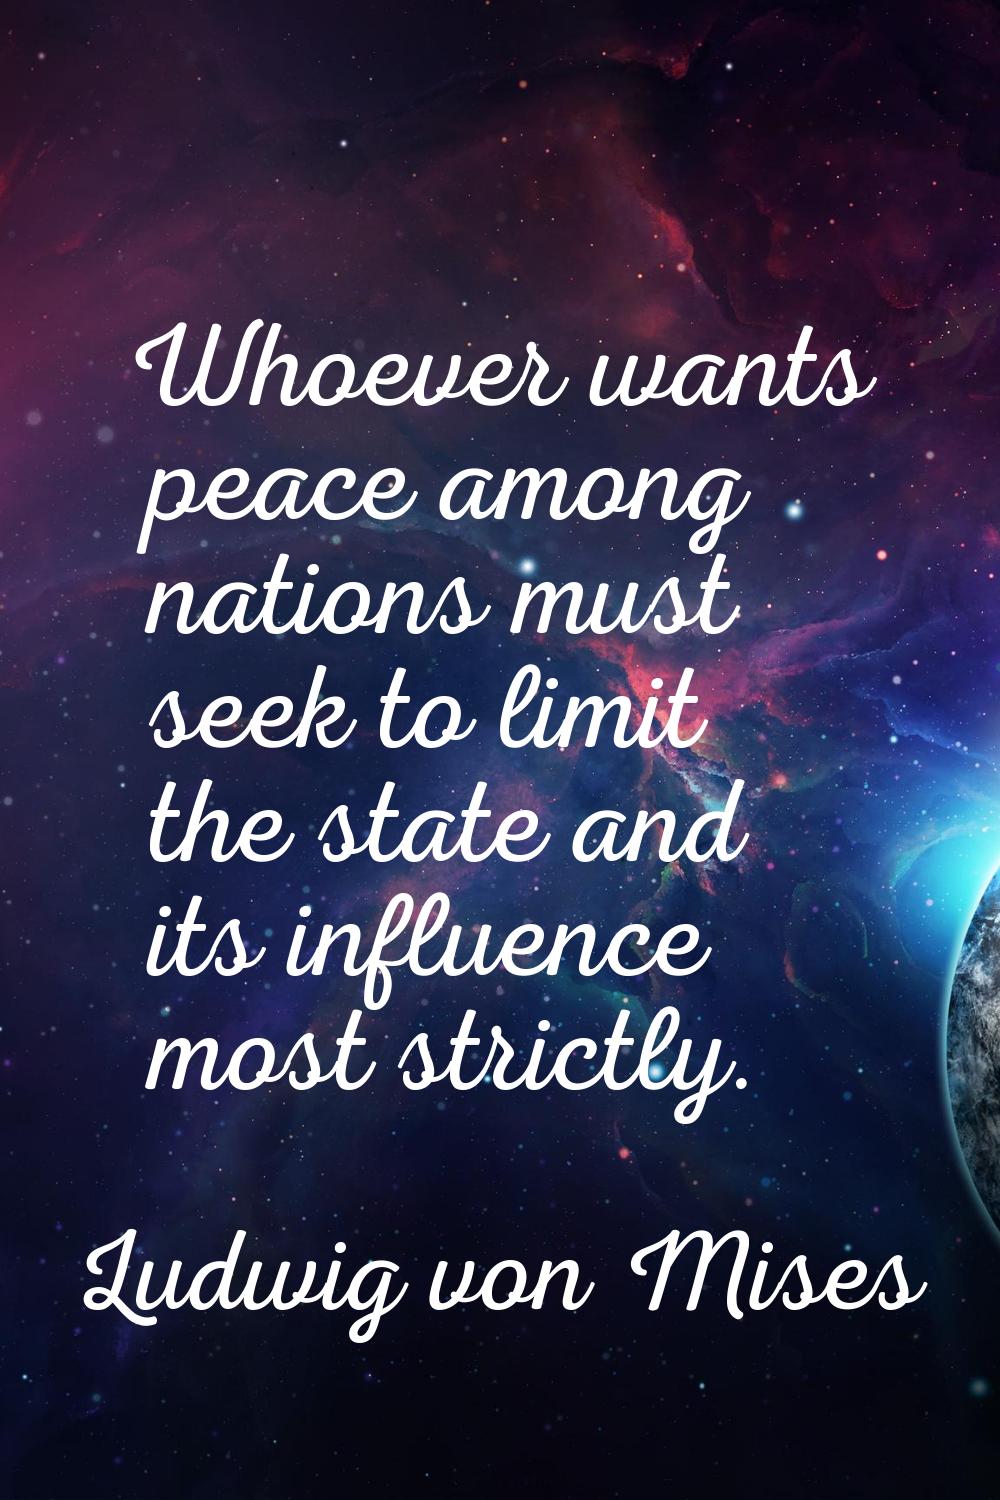 Whoever wants peace among nations must seek to limit the state and its influence most strictly.